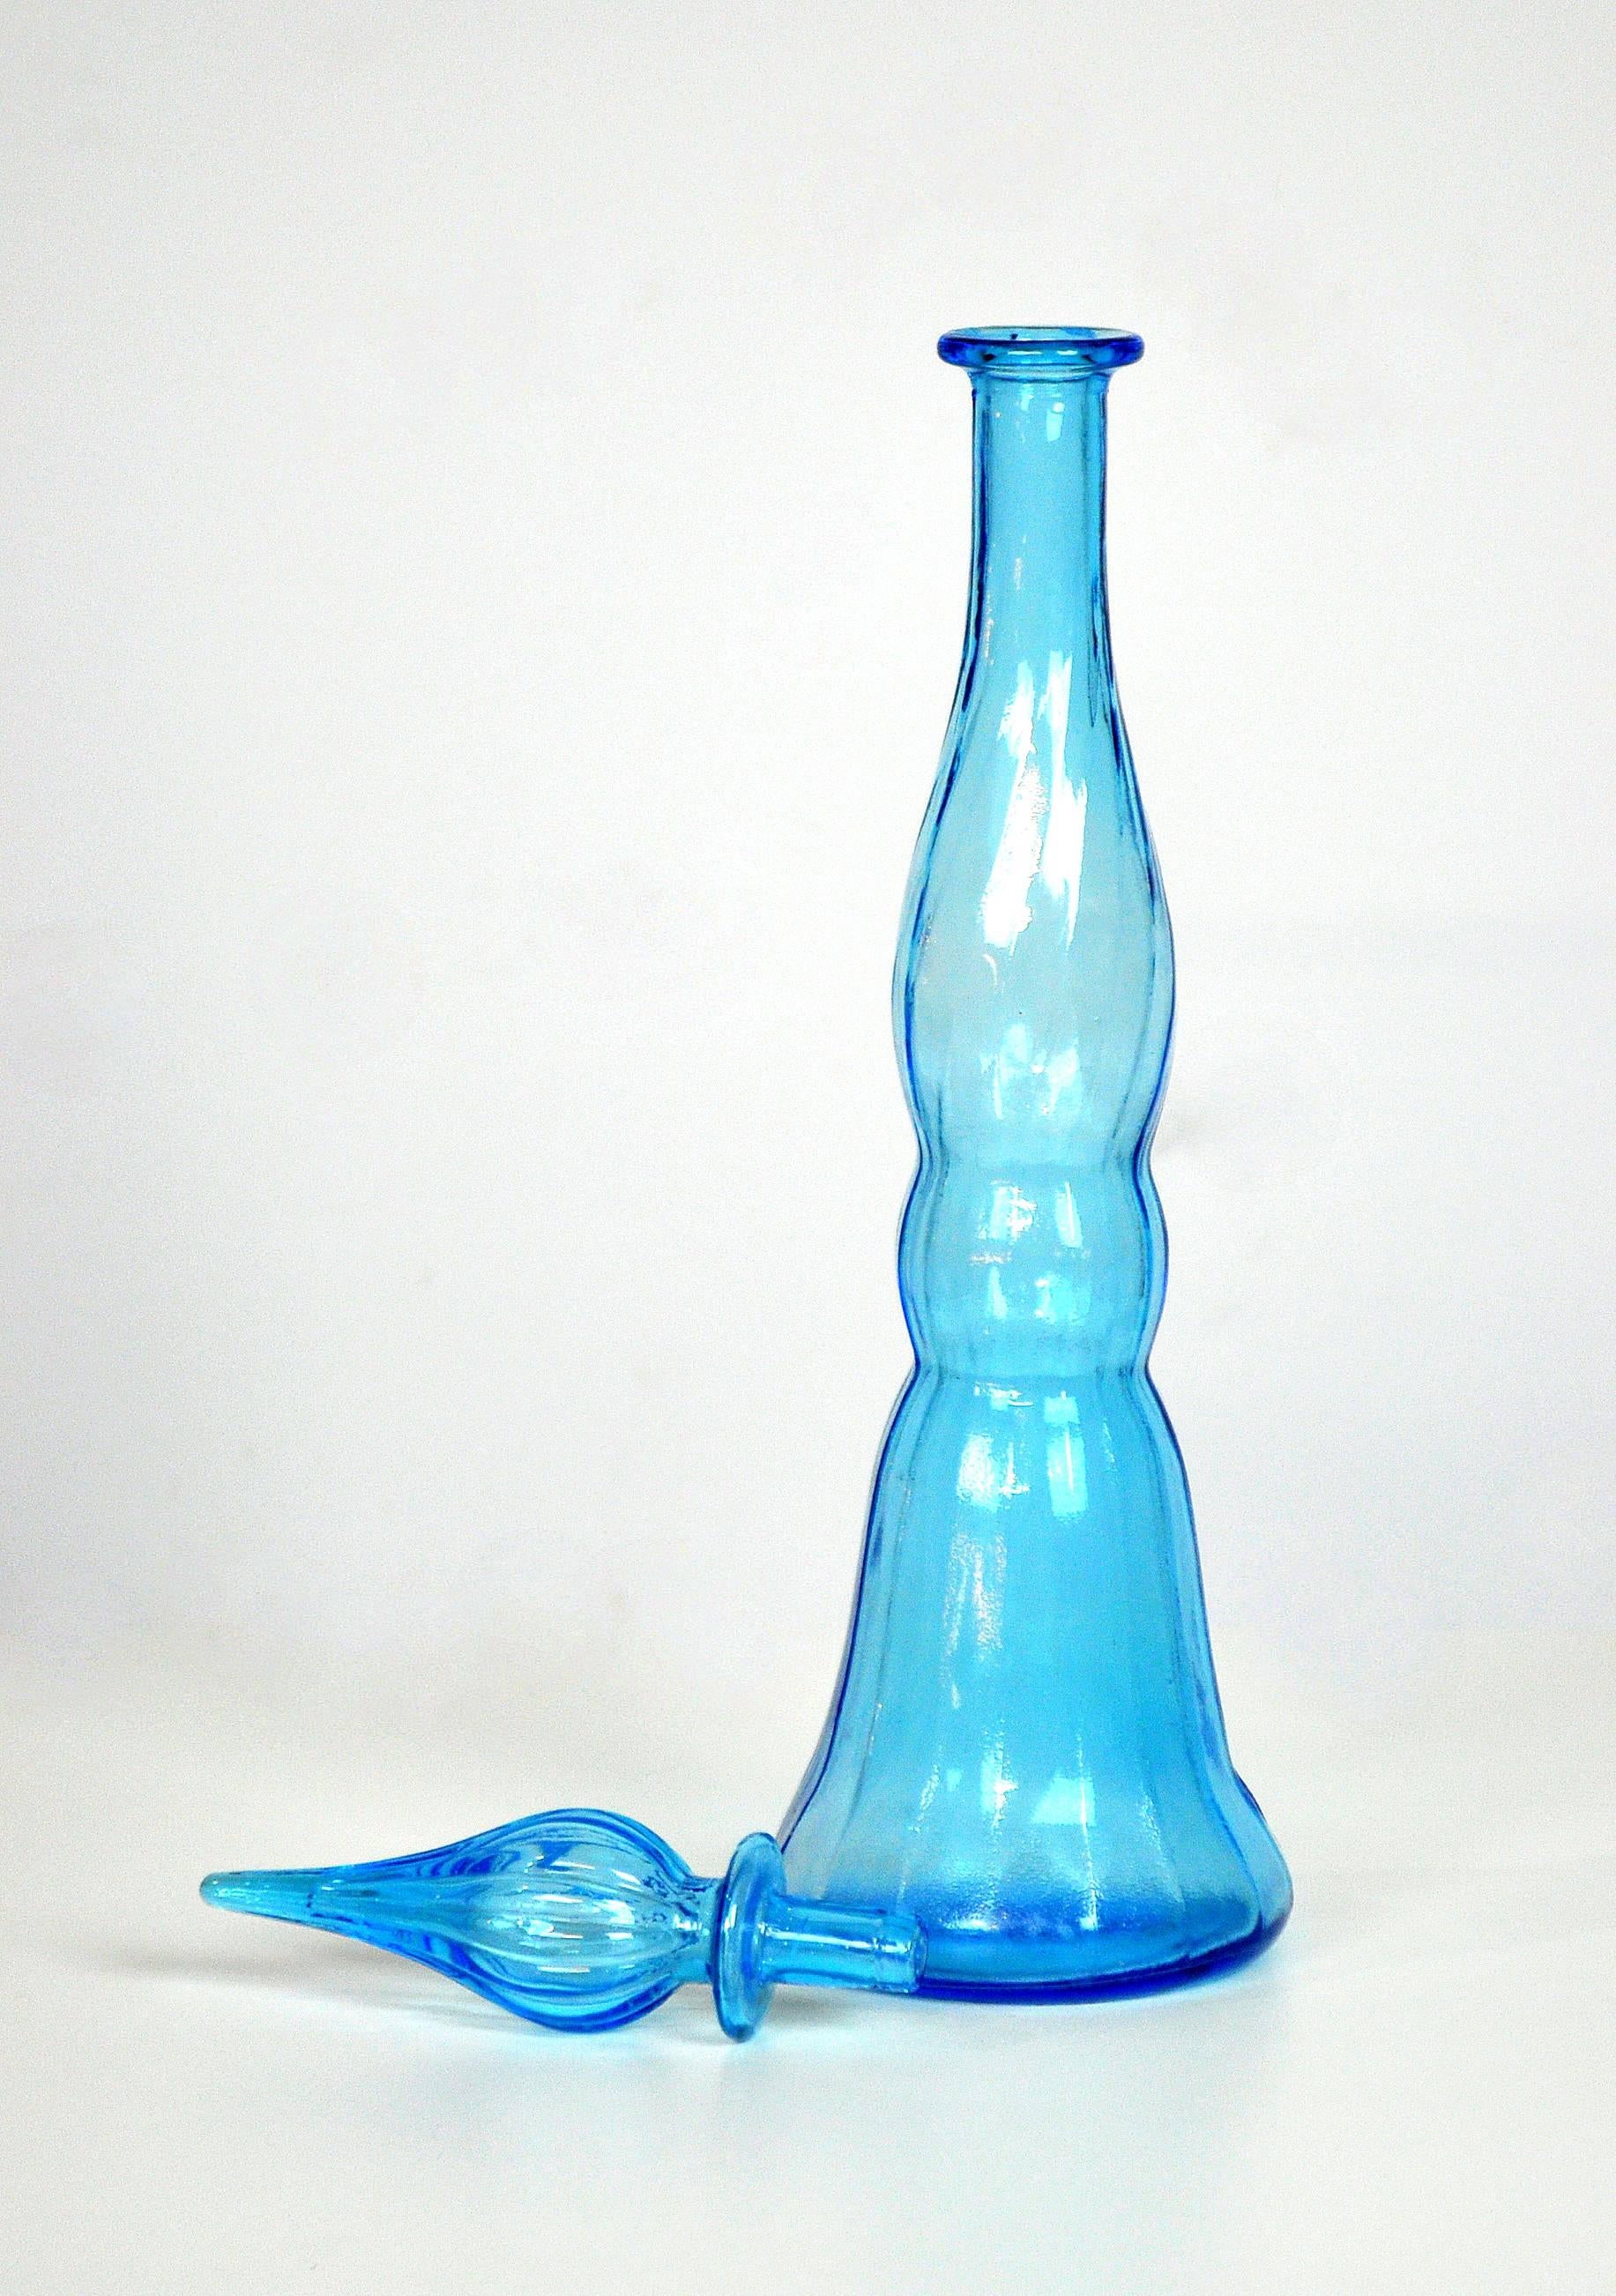 This vintage Mid-Century Modern large handblown glass genie bottle features a line pattern and a vibrant light or baby blue color. The bottle with stopper dates from the 1960s and was made in Italy. Quite tall and very decorative, it could accent